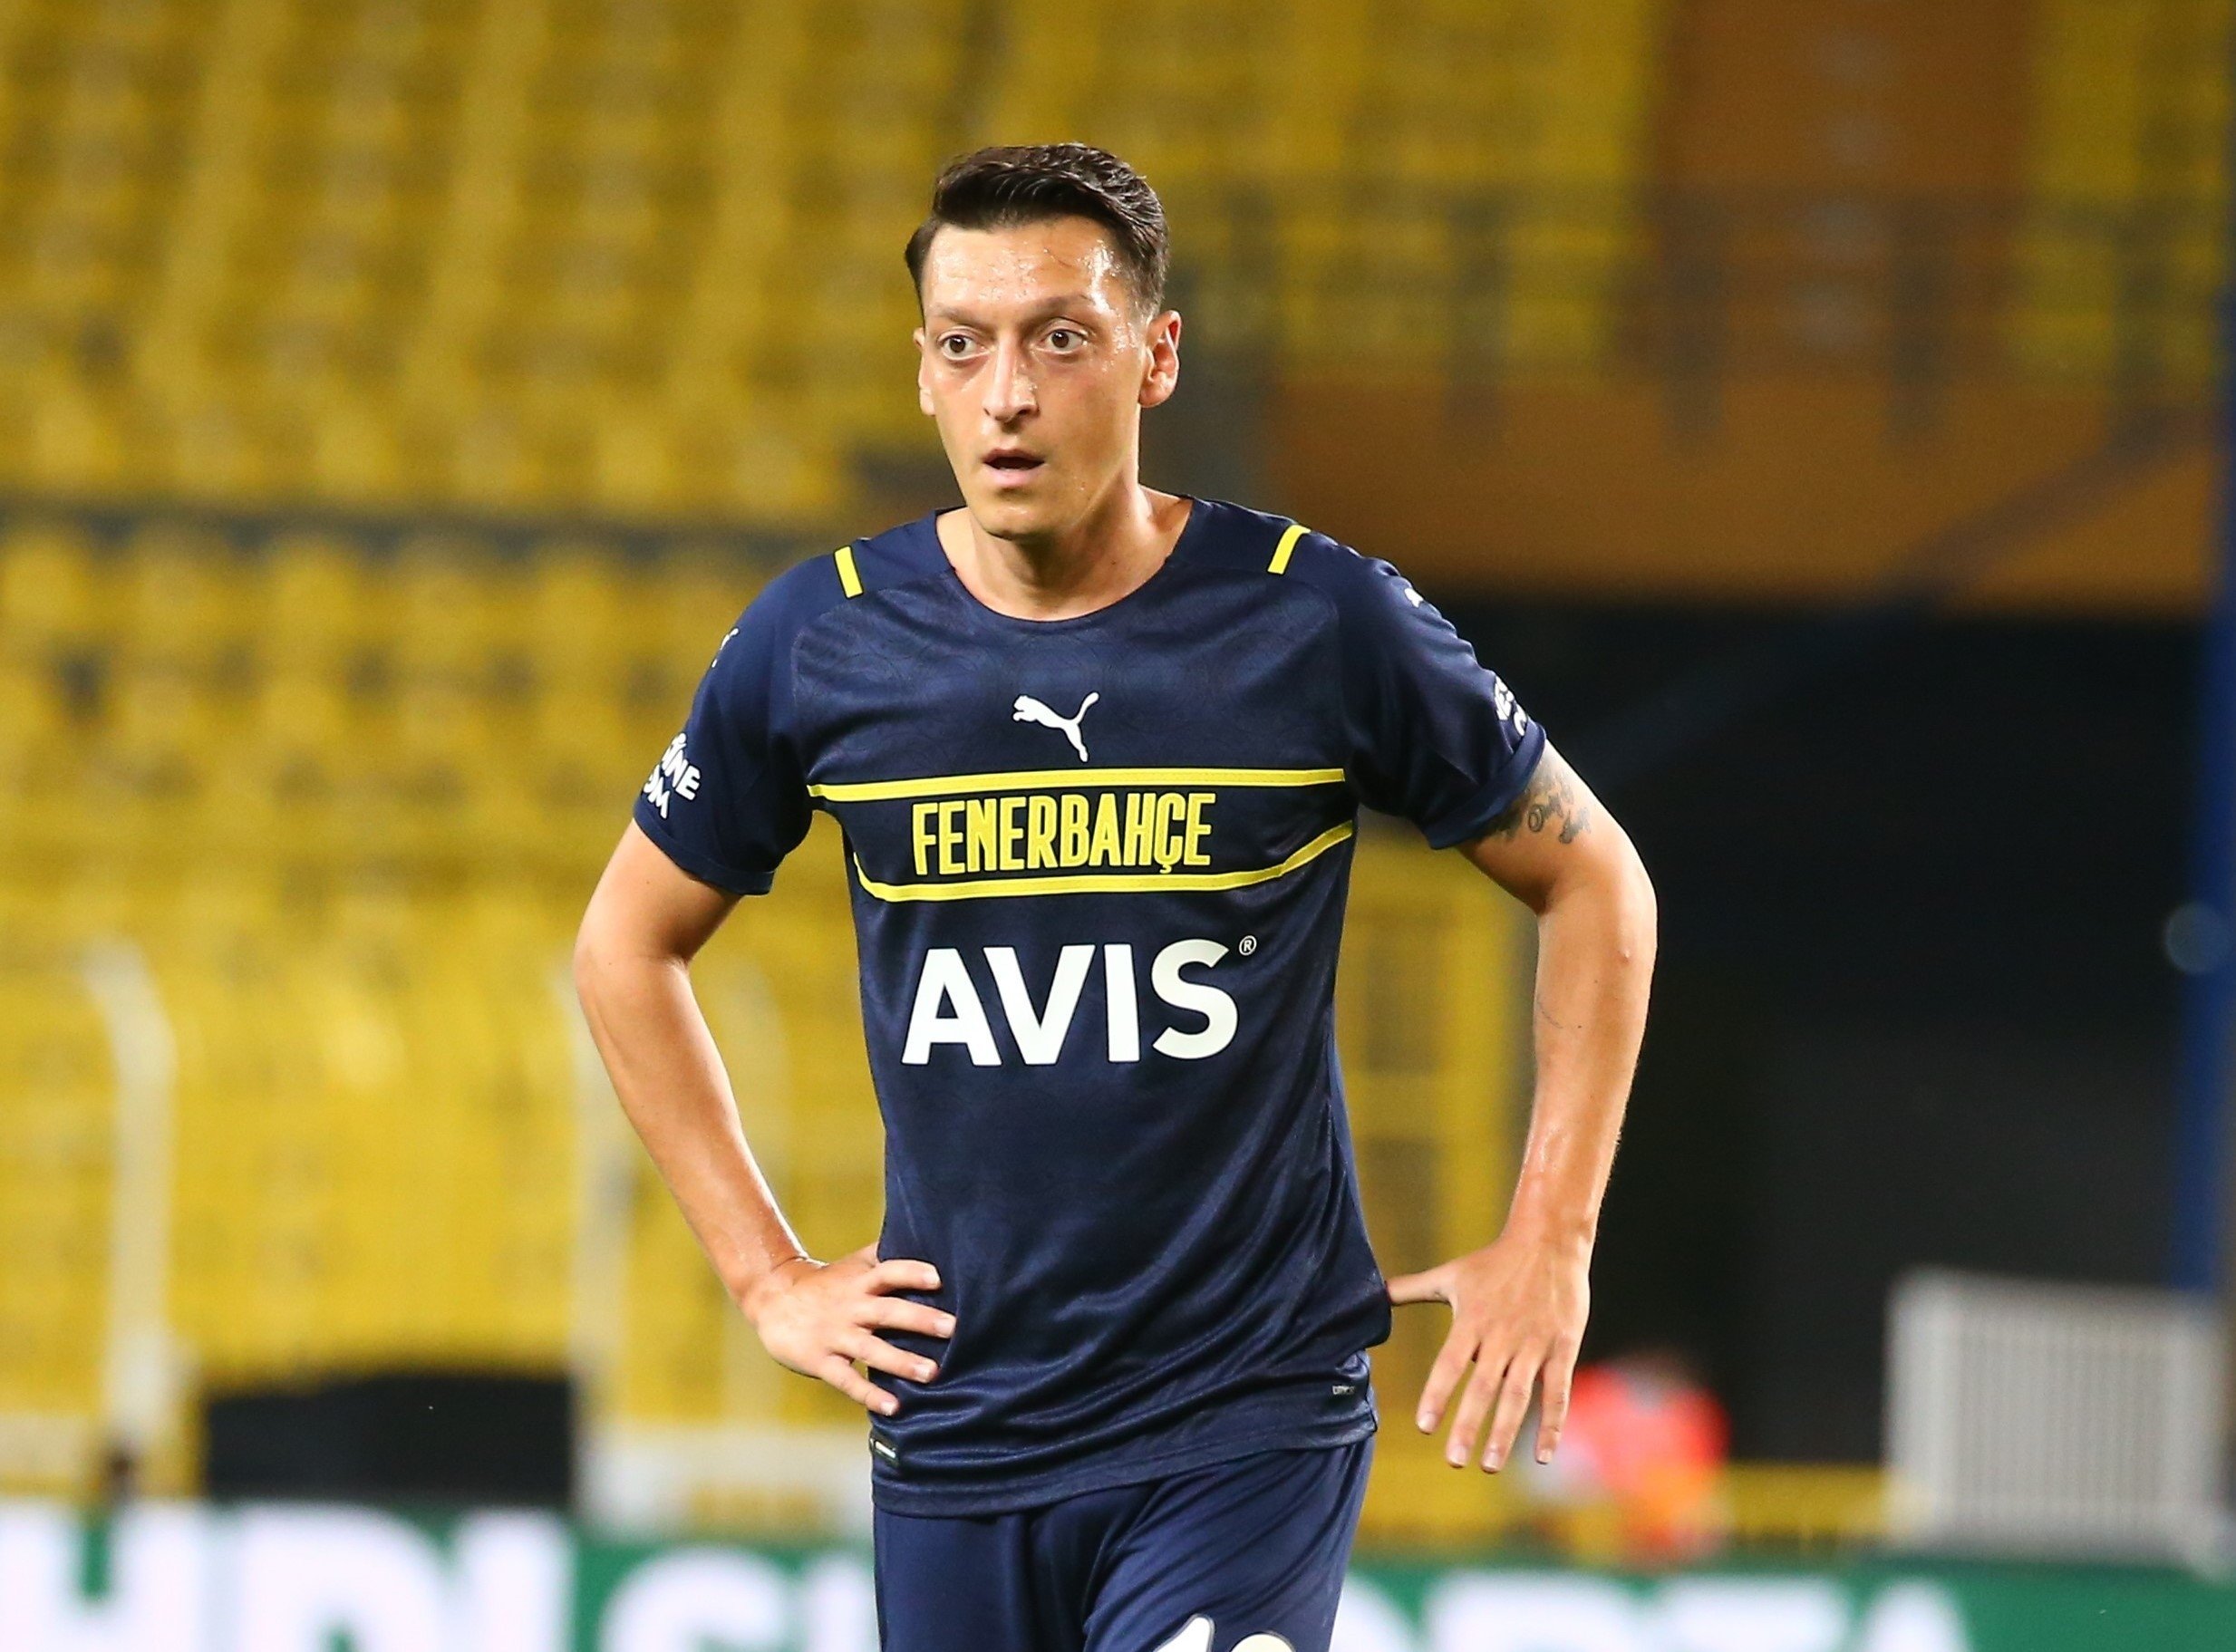 Mesut Ozil joins Istanbul Basaksehir after his contract with Fenerbahce got terminated